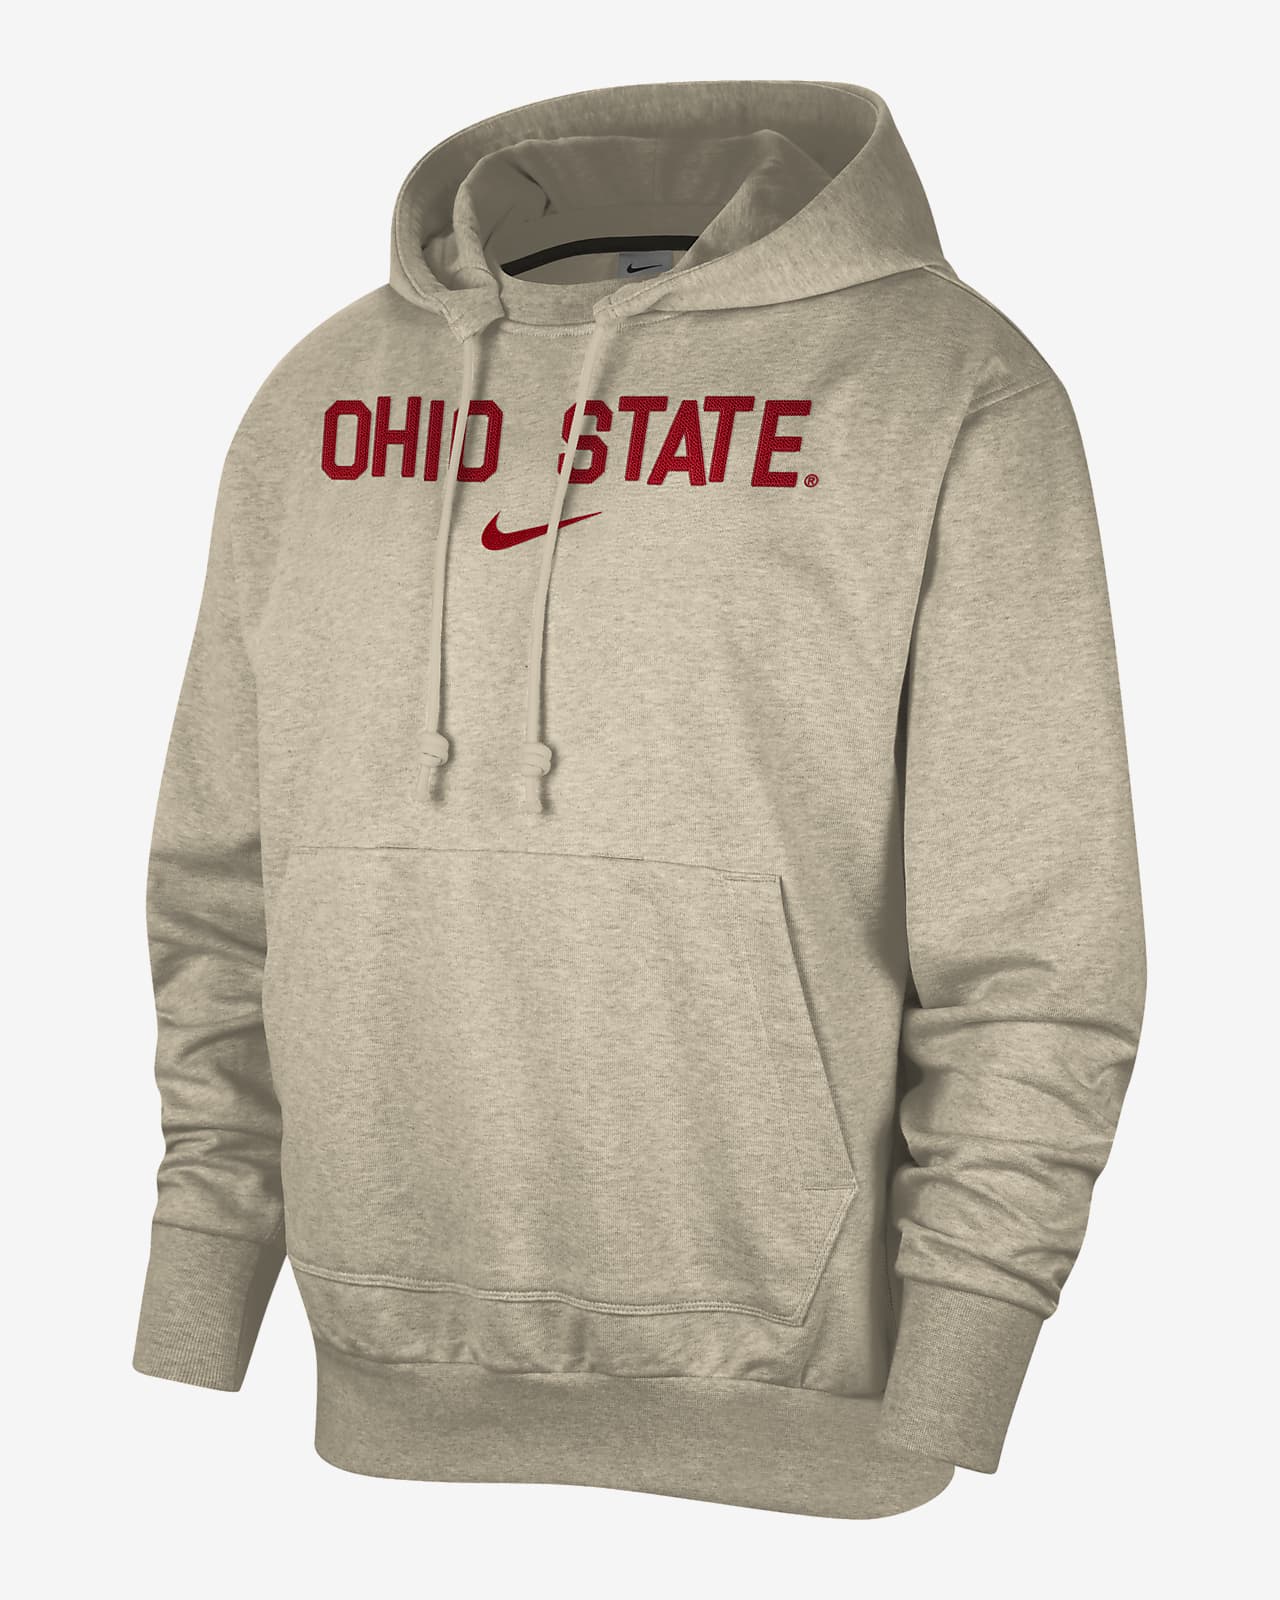 https://static.nike.com/a/images/t_PDP_1280_v1/f_auto,q_auto:eco/14aae6a4-90d6-46a9-a77d-2ff4f88d80bc/ohio-state-standard-issue-menspullover-hoodie-qMr3mR.png